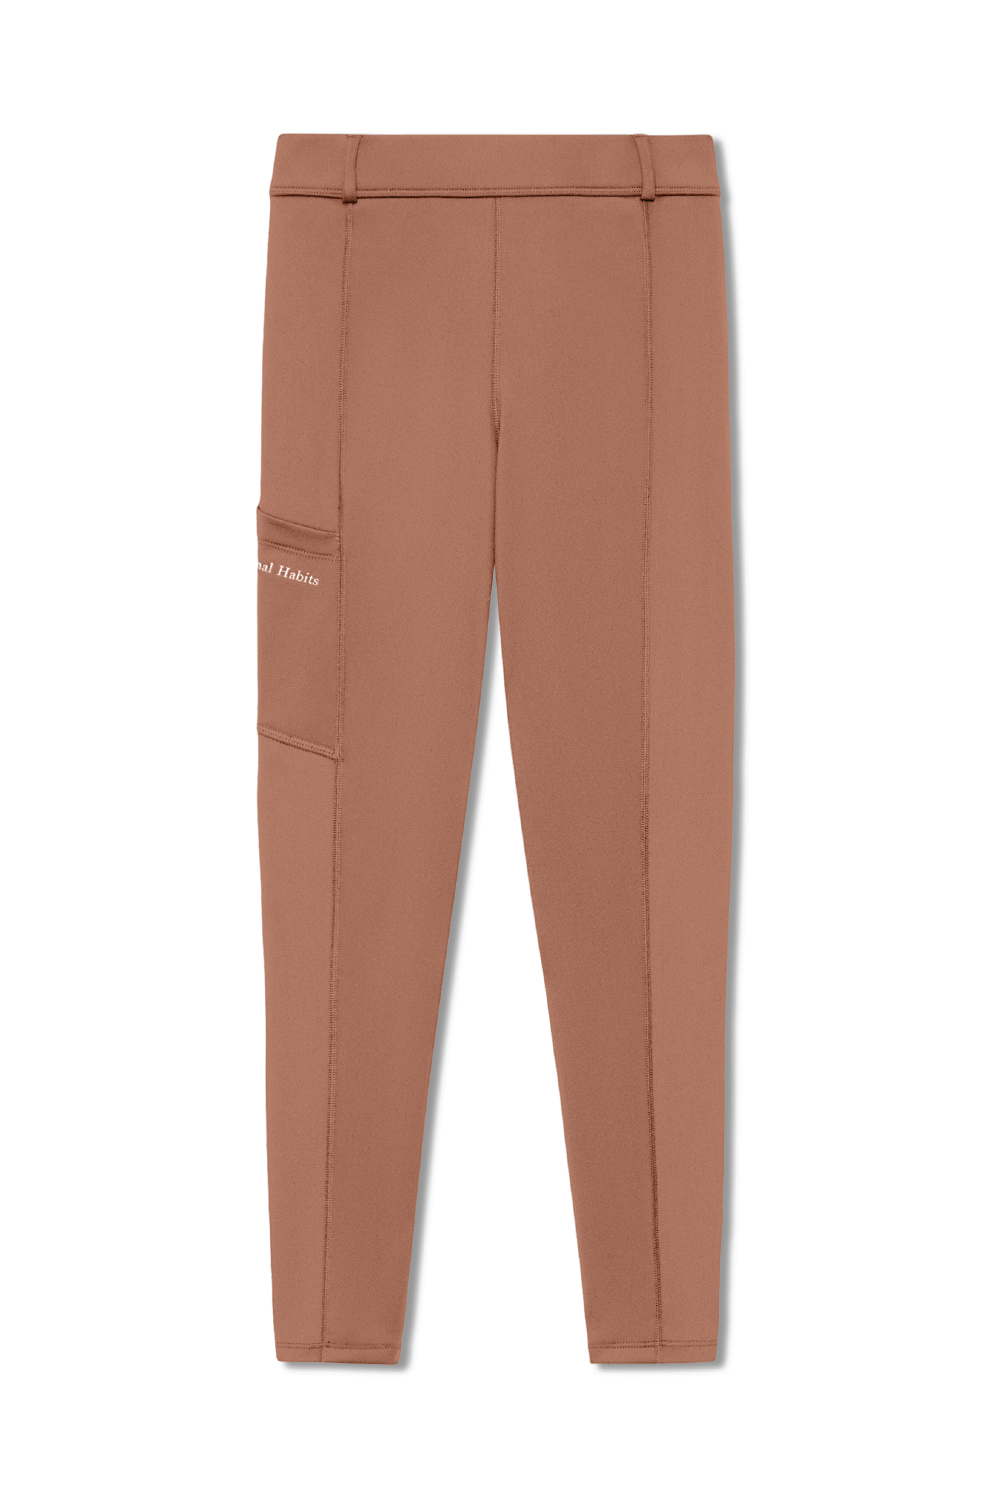 Louis Insulated Active Legging in Tan – Recreational Habits